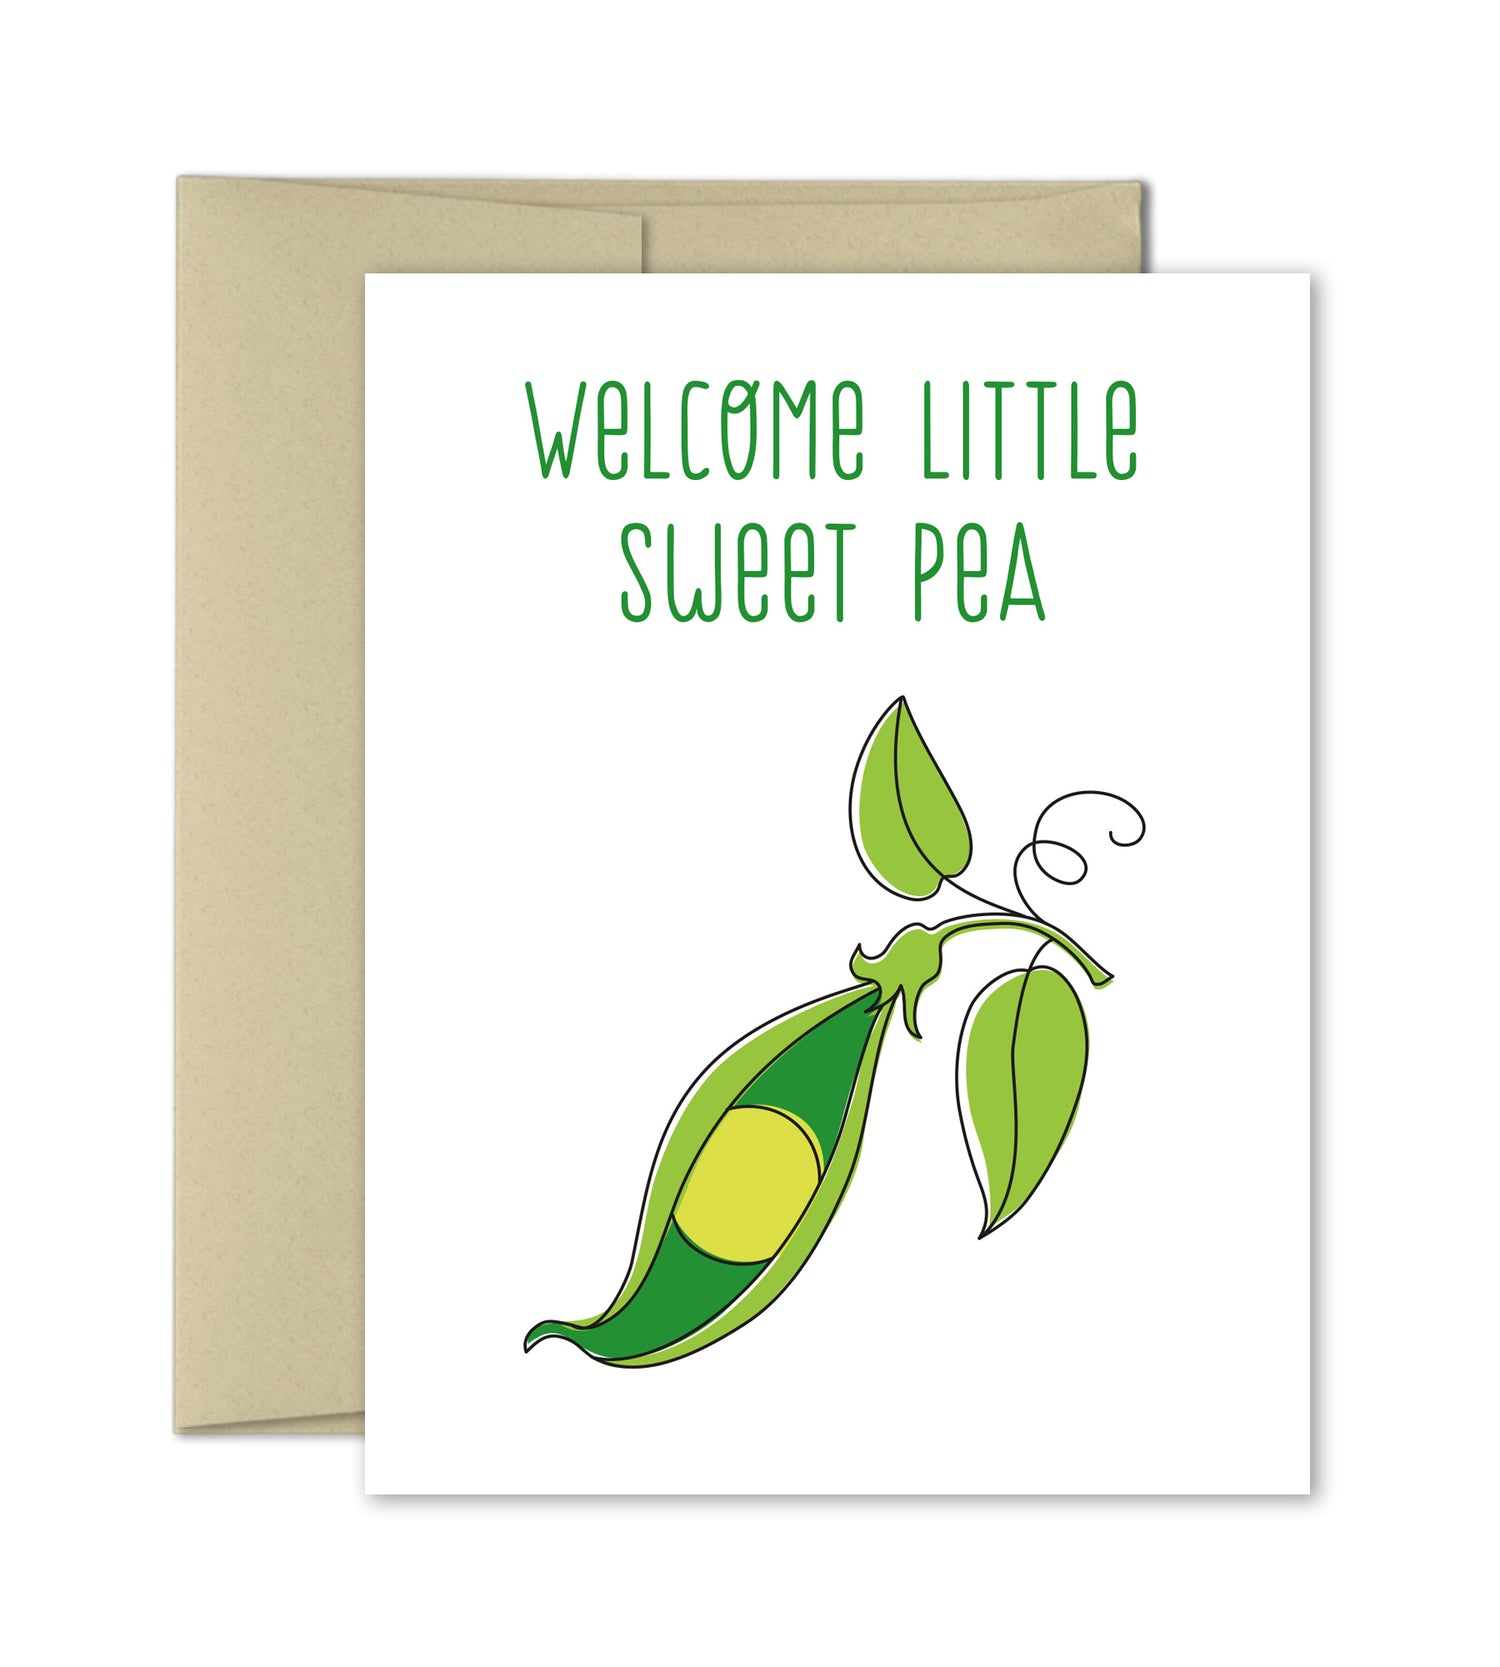 Welcome little Sweet Pea - New Baby Congratulations Card by The Imagination Spot - The Imagination Spot